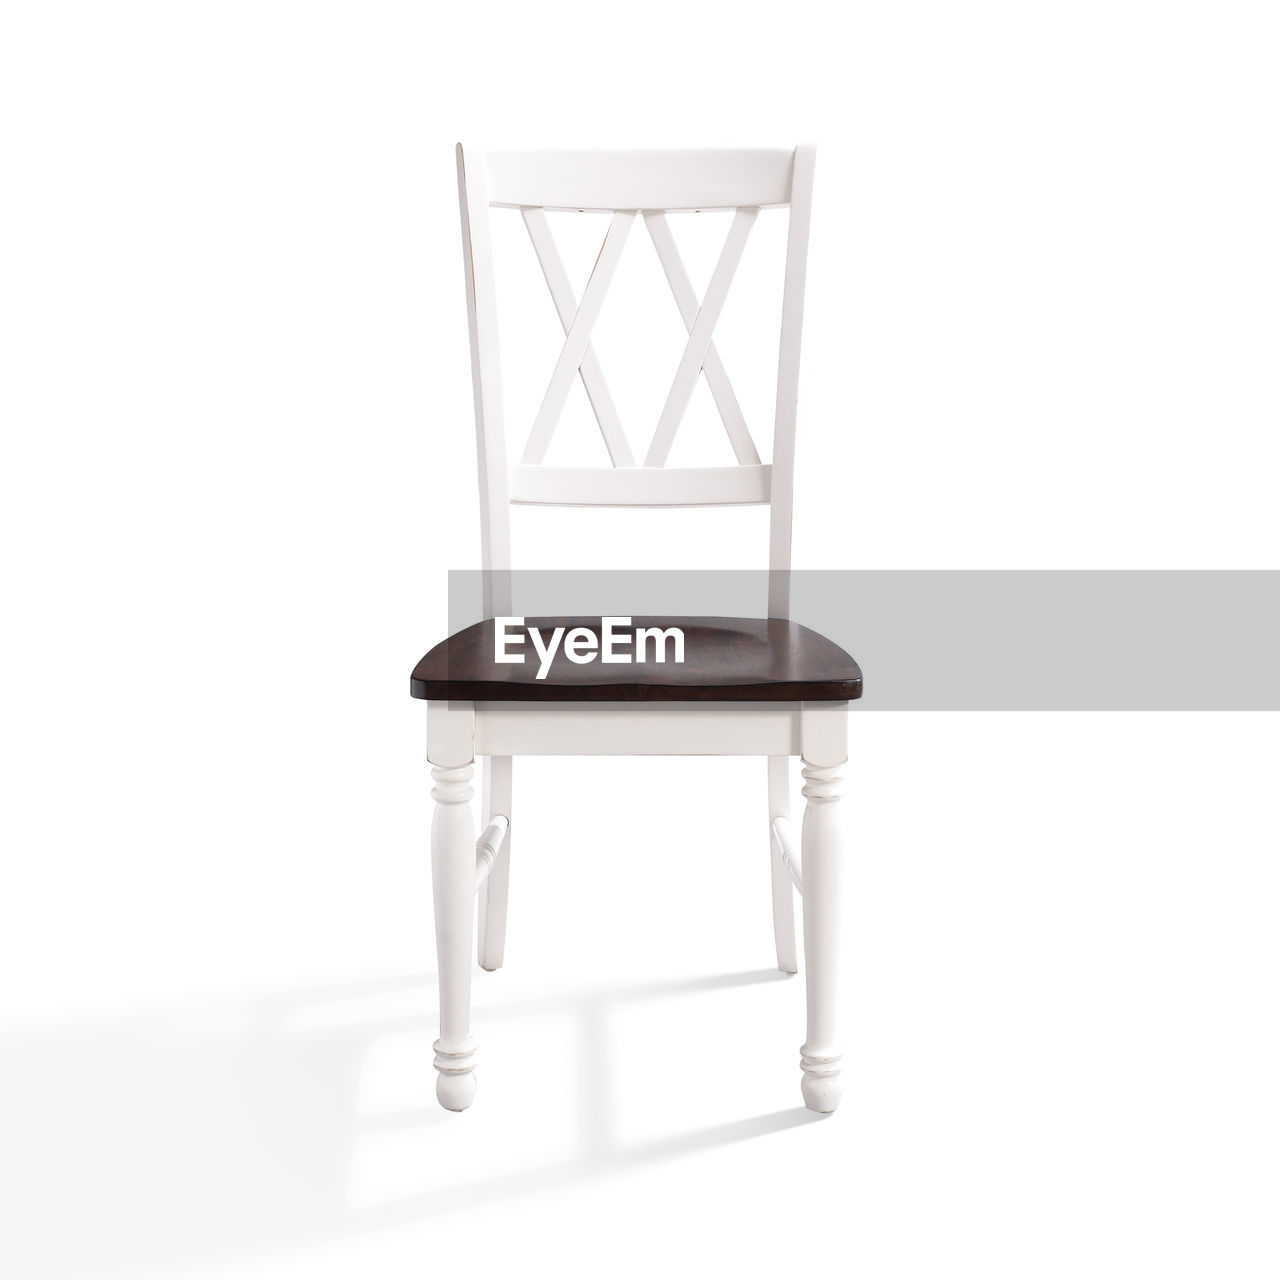 VIEW OF EMPTY CHAIRS AGAINST WHITE BACKGROUND